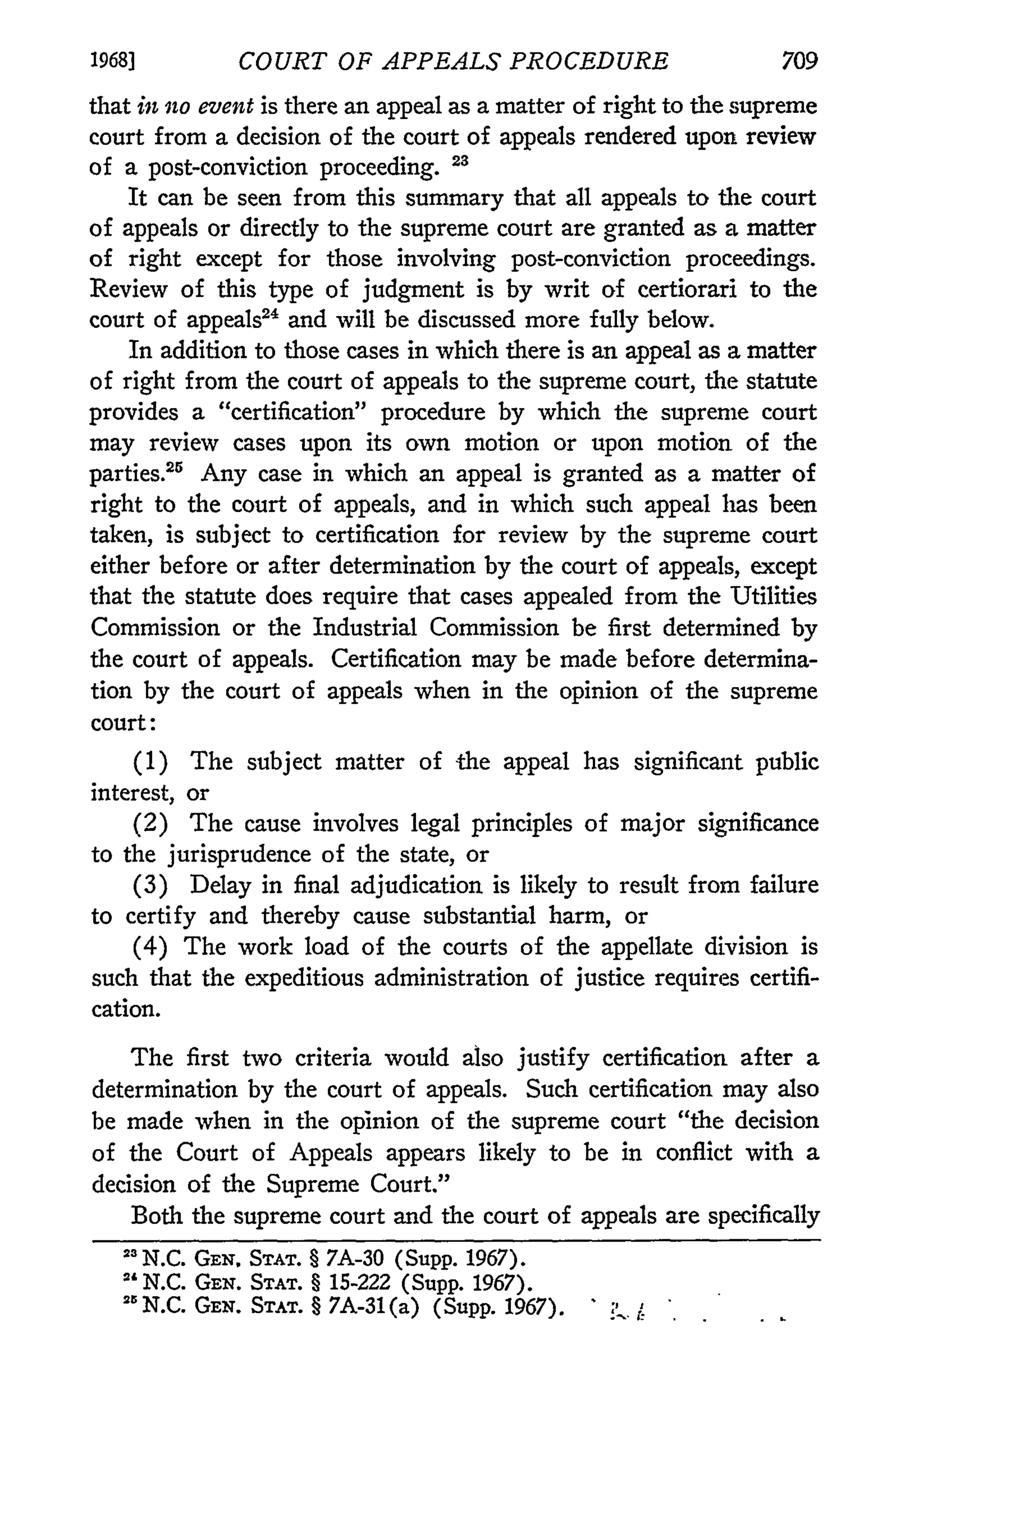 1968] COURT OF APPEALS PROCEDURE that in nzo event is there an appeal as a matter of right to the supreme court from a decision of the court of appeals rendered upon review of a post-conviction